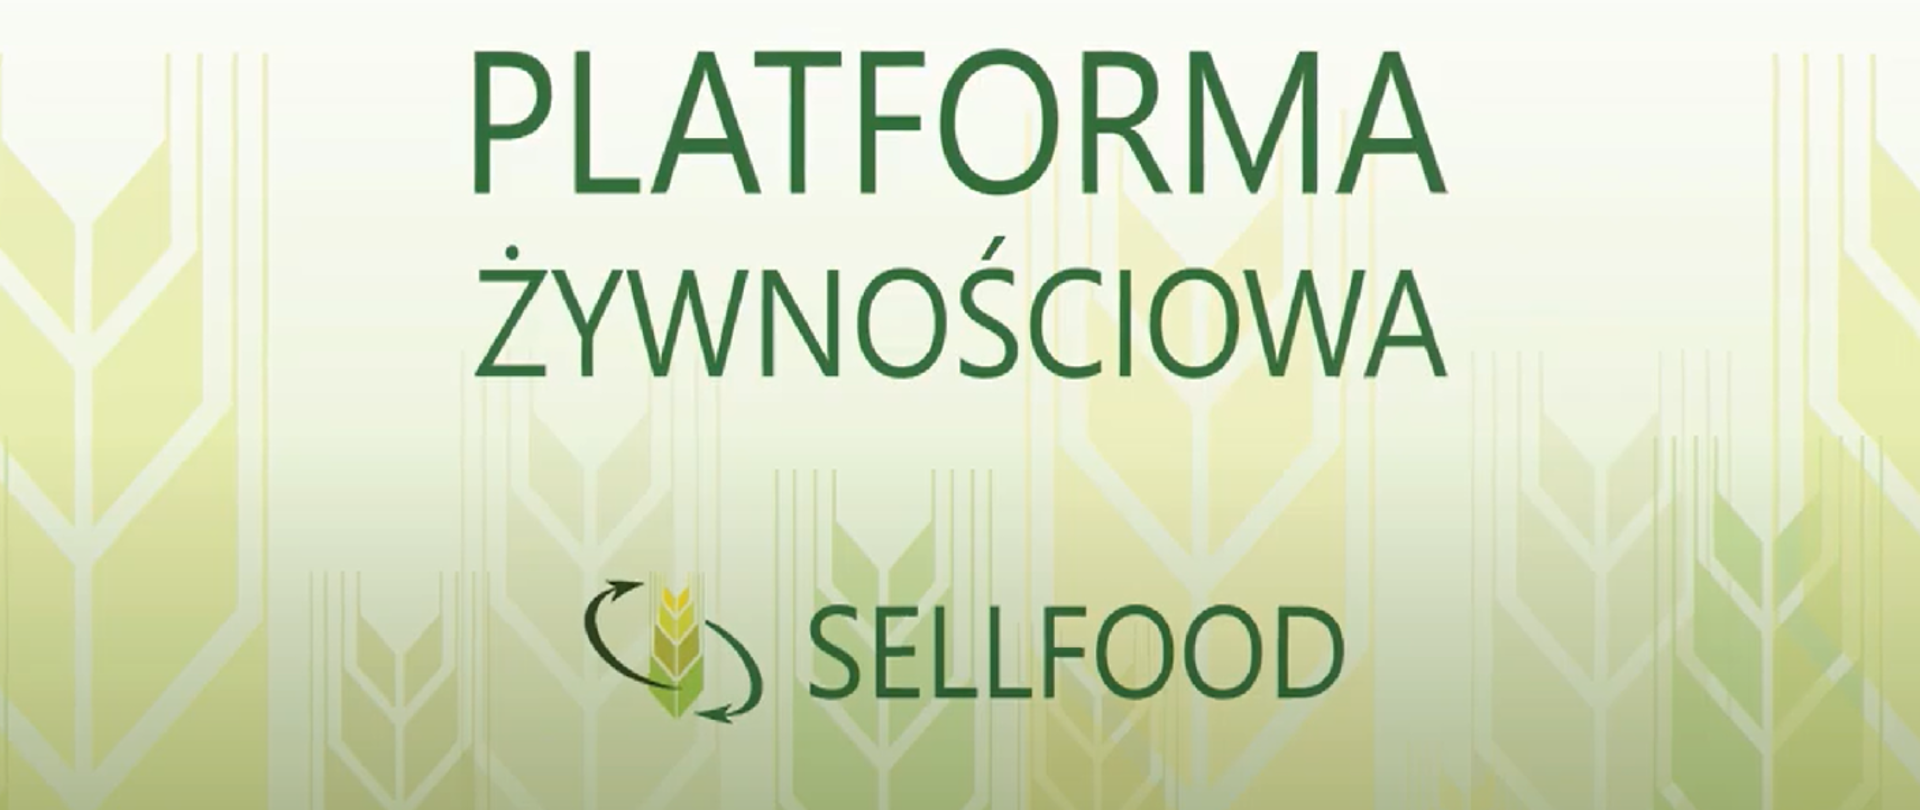 A horizontal board with a green inscription in capital letters: Sellfood Food Platform. Light green background with graphically represented ears of grain.
